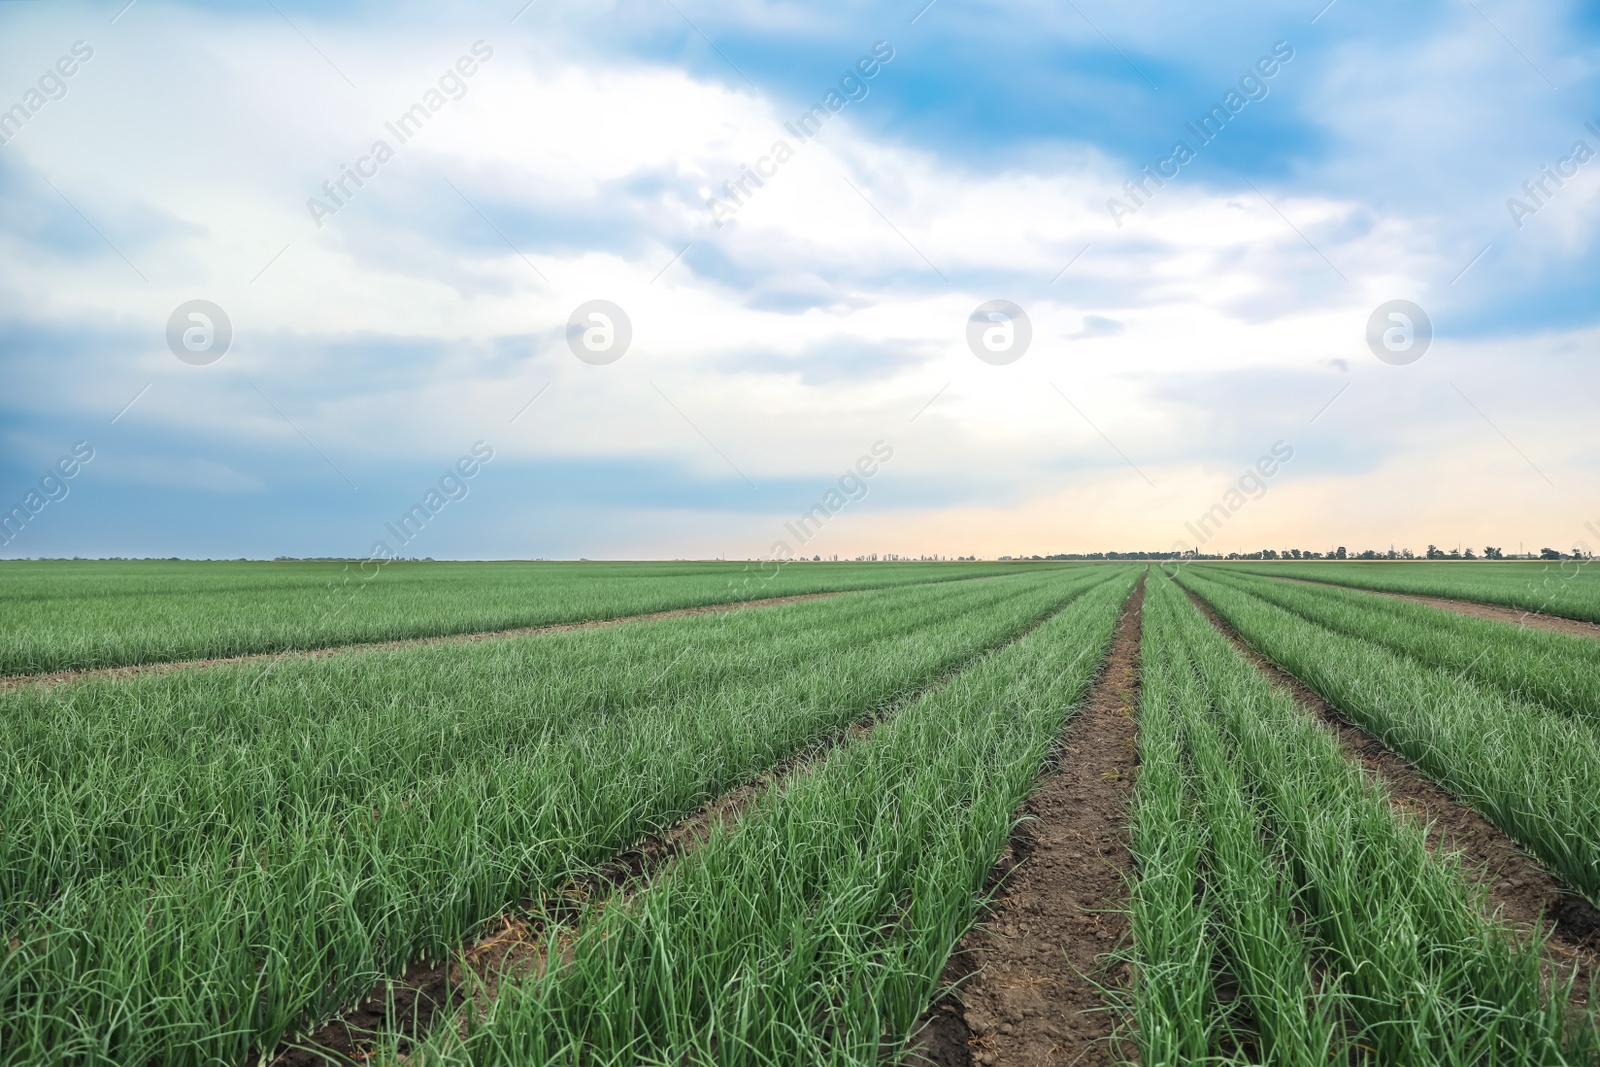 Photo of Rows of green onion in agricultural field